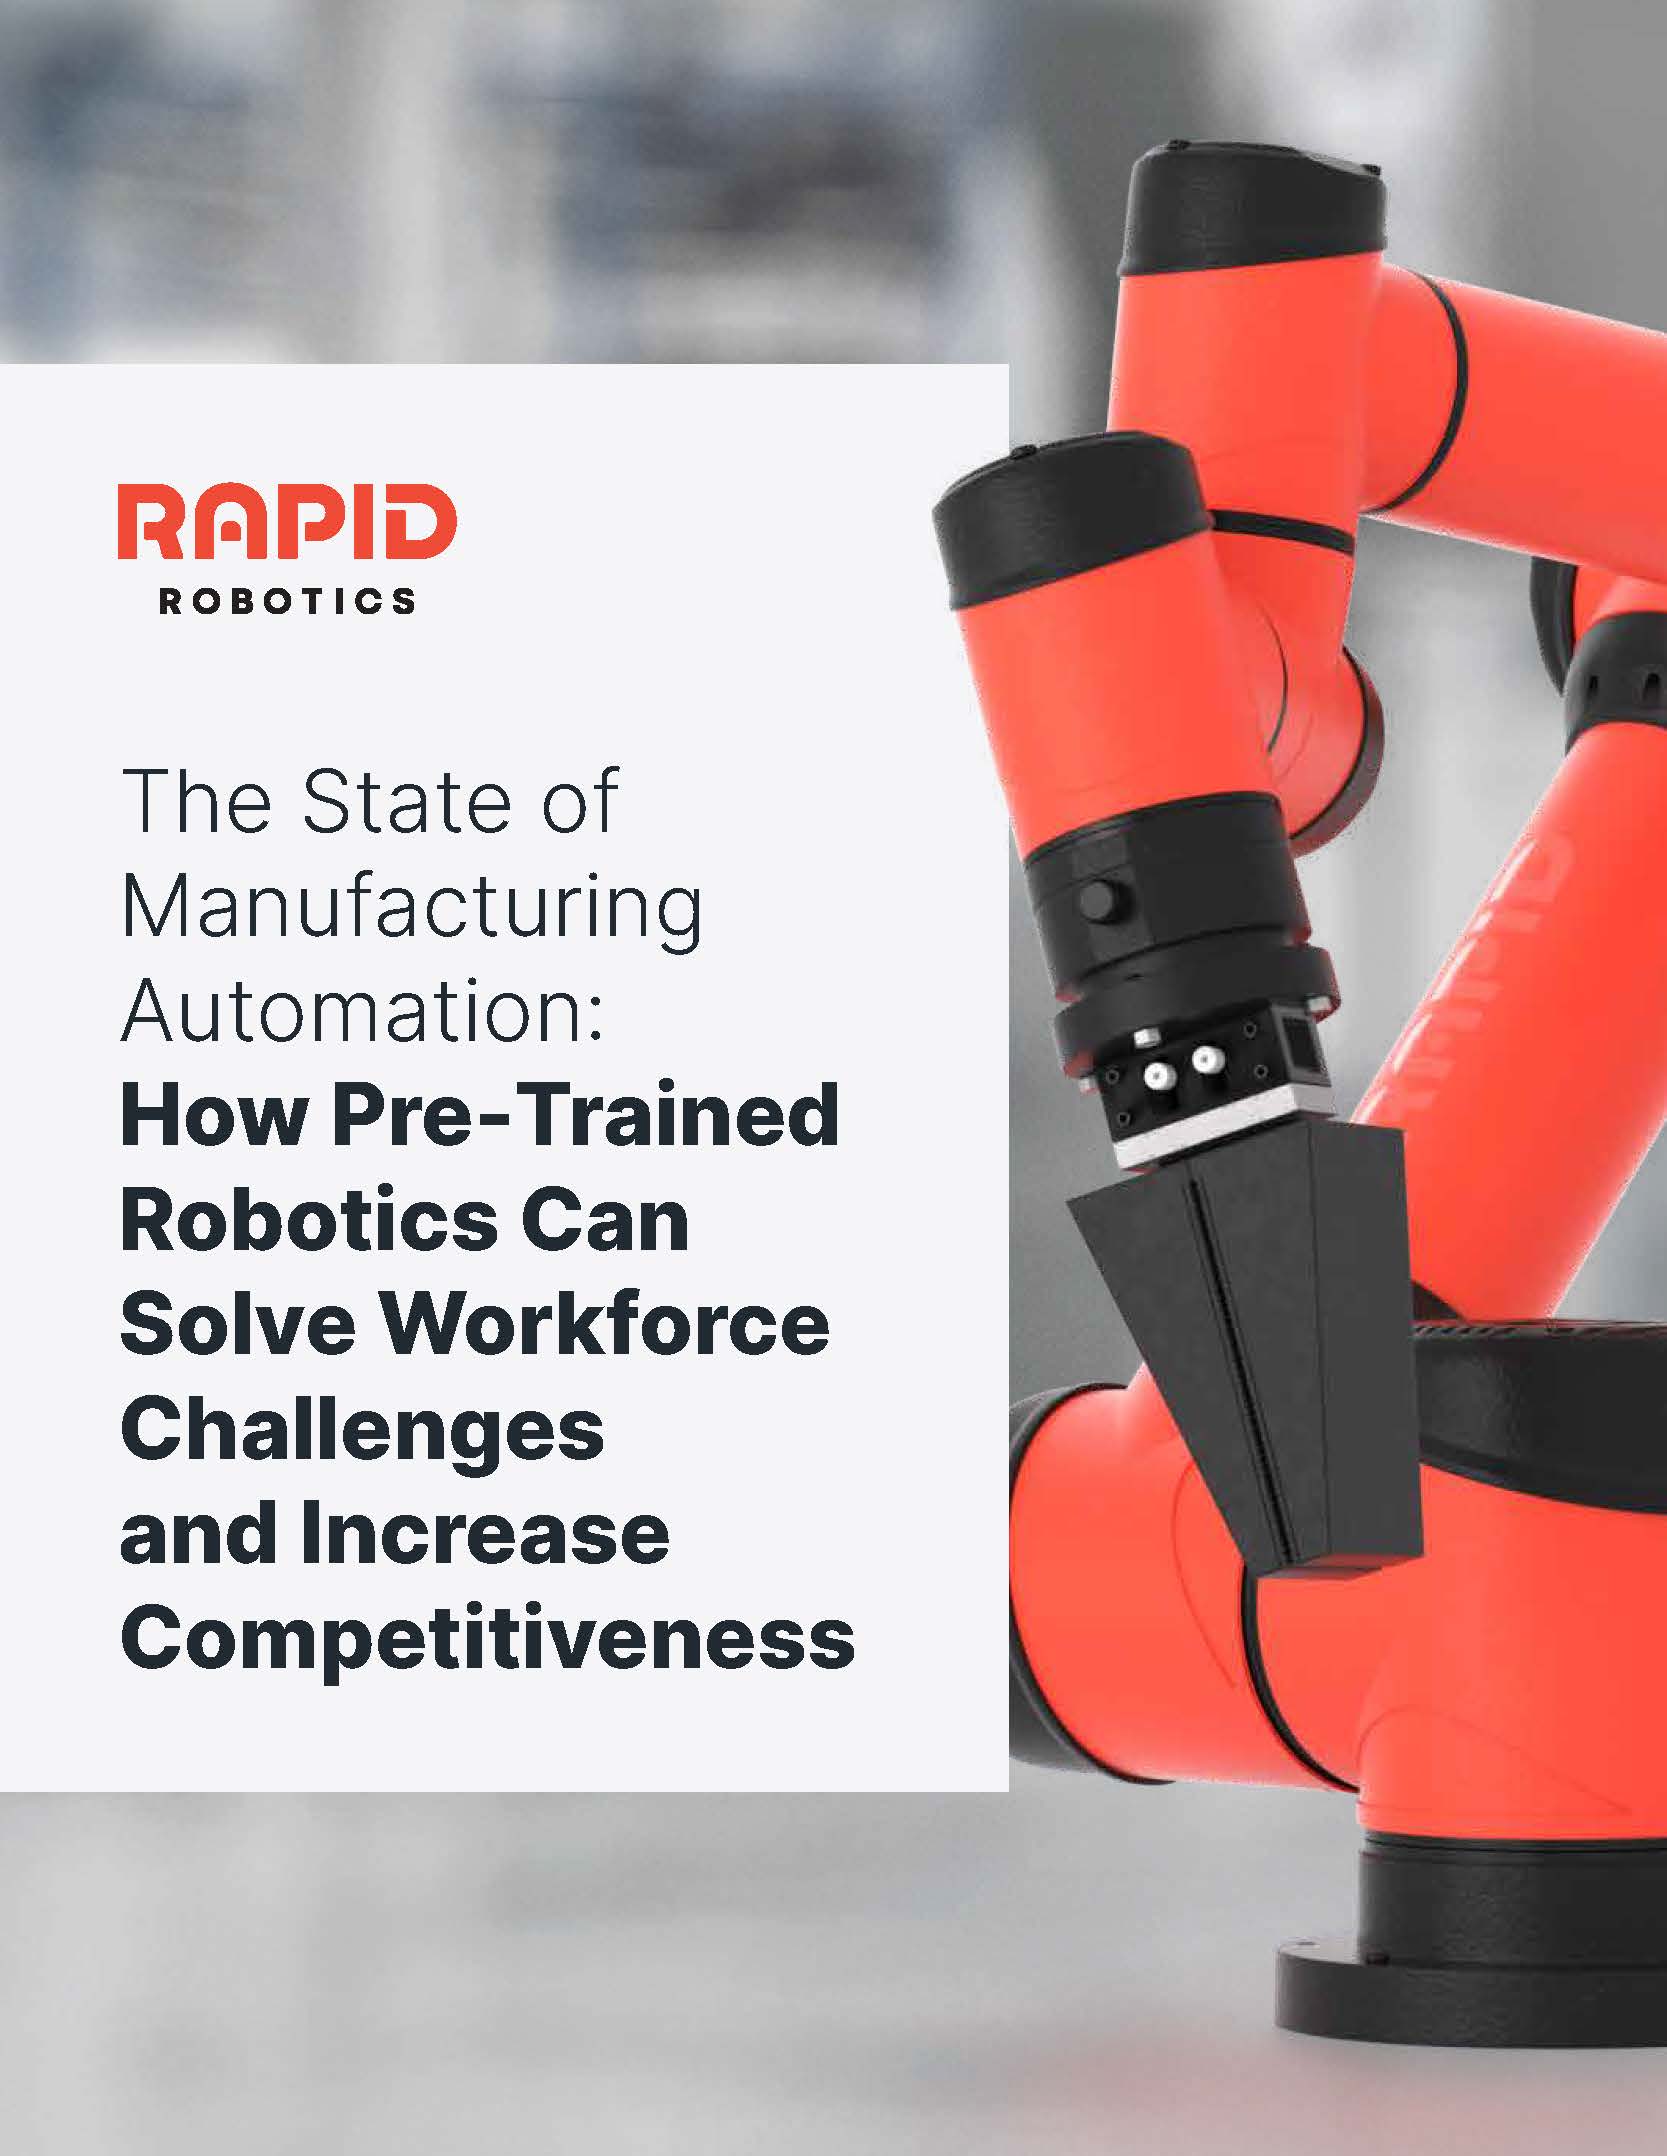 The State of Manufacturing Automation 2022: How Pre-Trained Robotics Can Solve Workforce Challenges and Increase Competitiveness